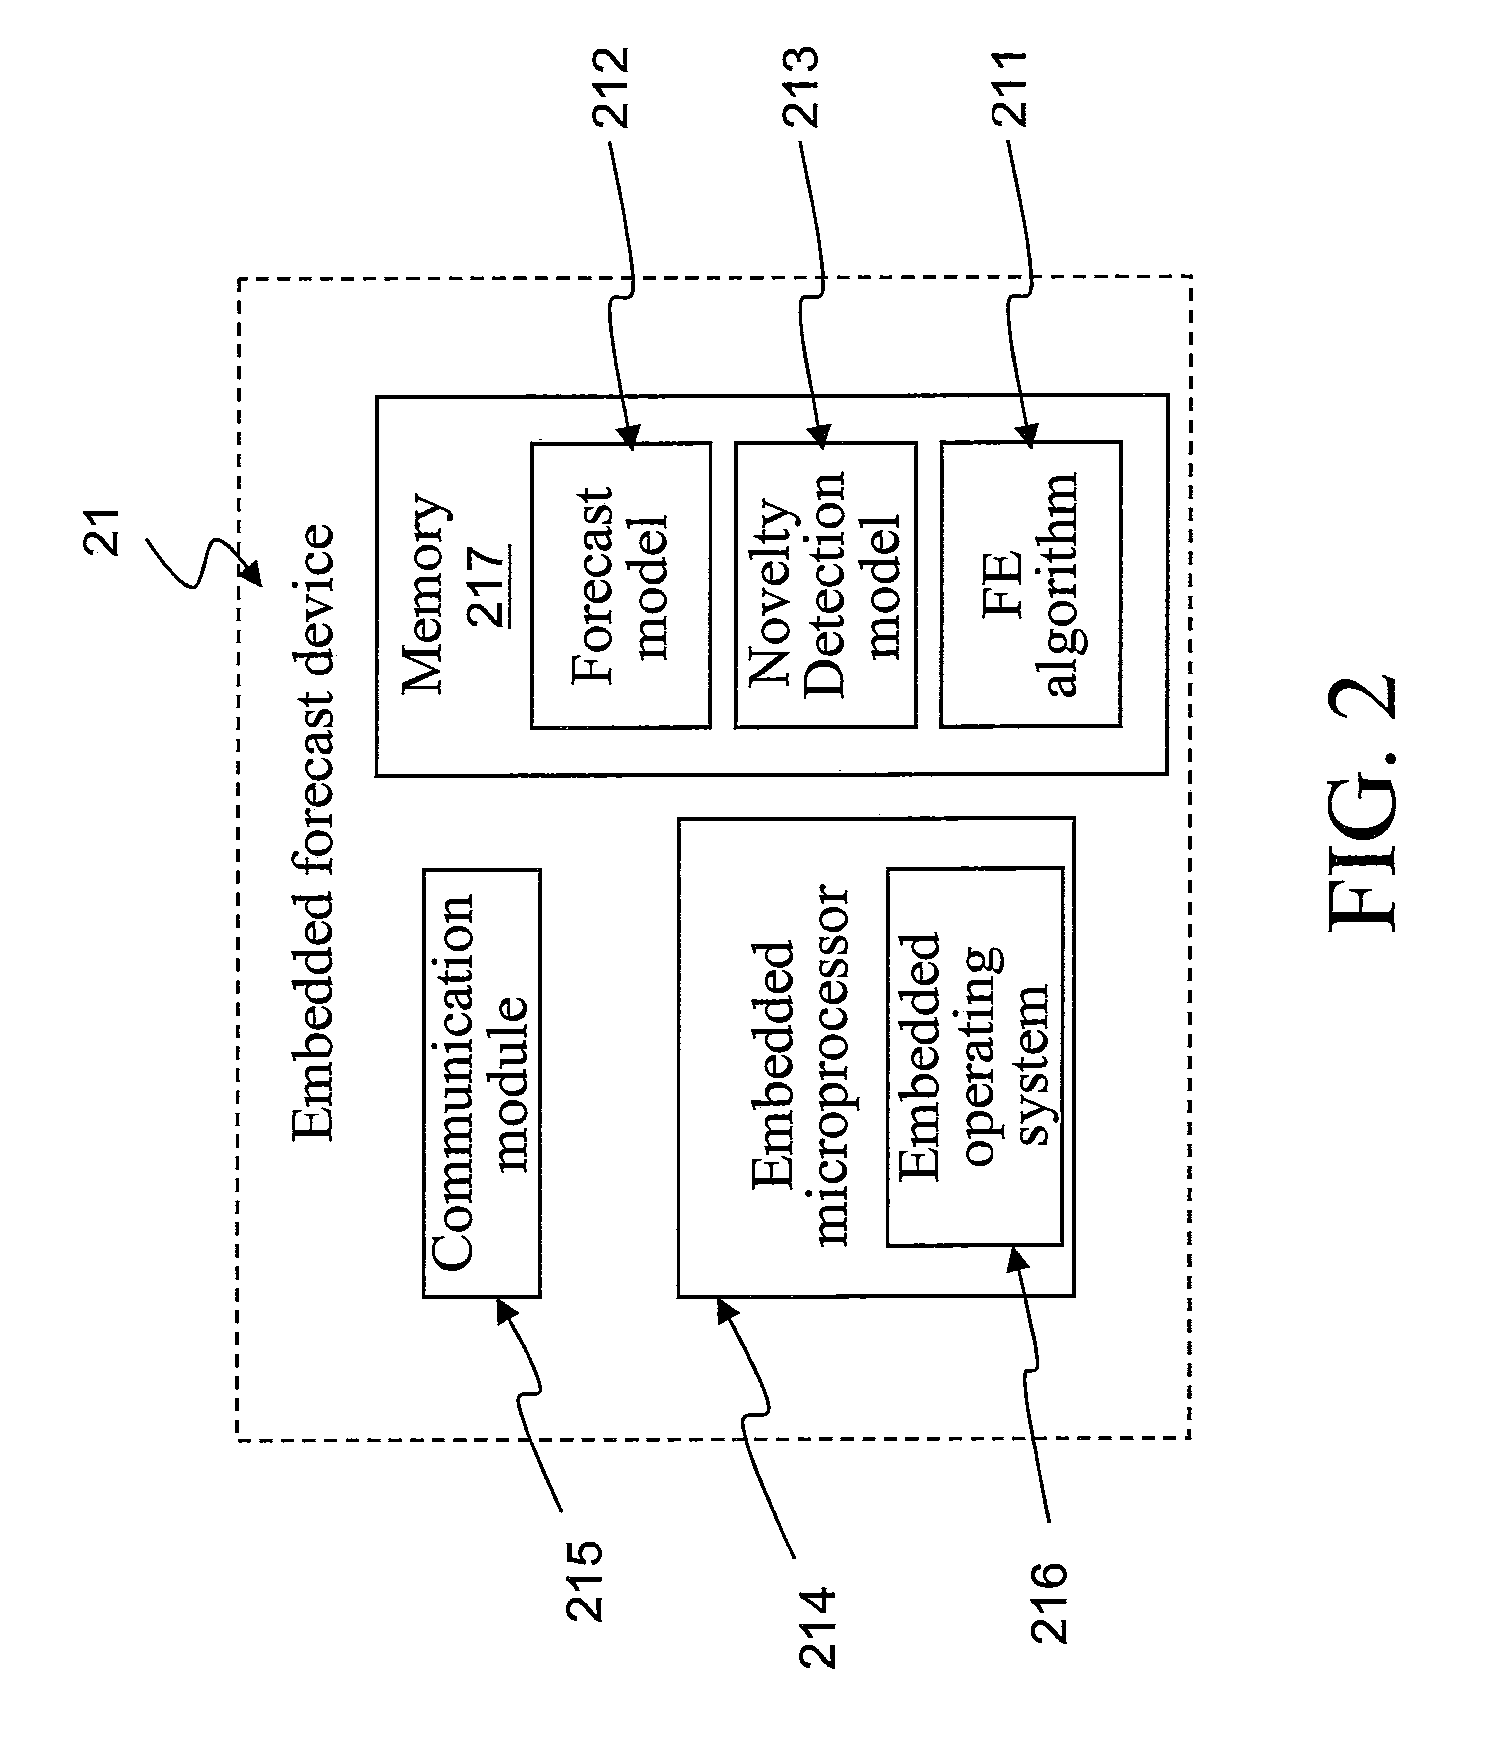 System for maintaining and analyzing manufacturing equipment and method thereof